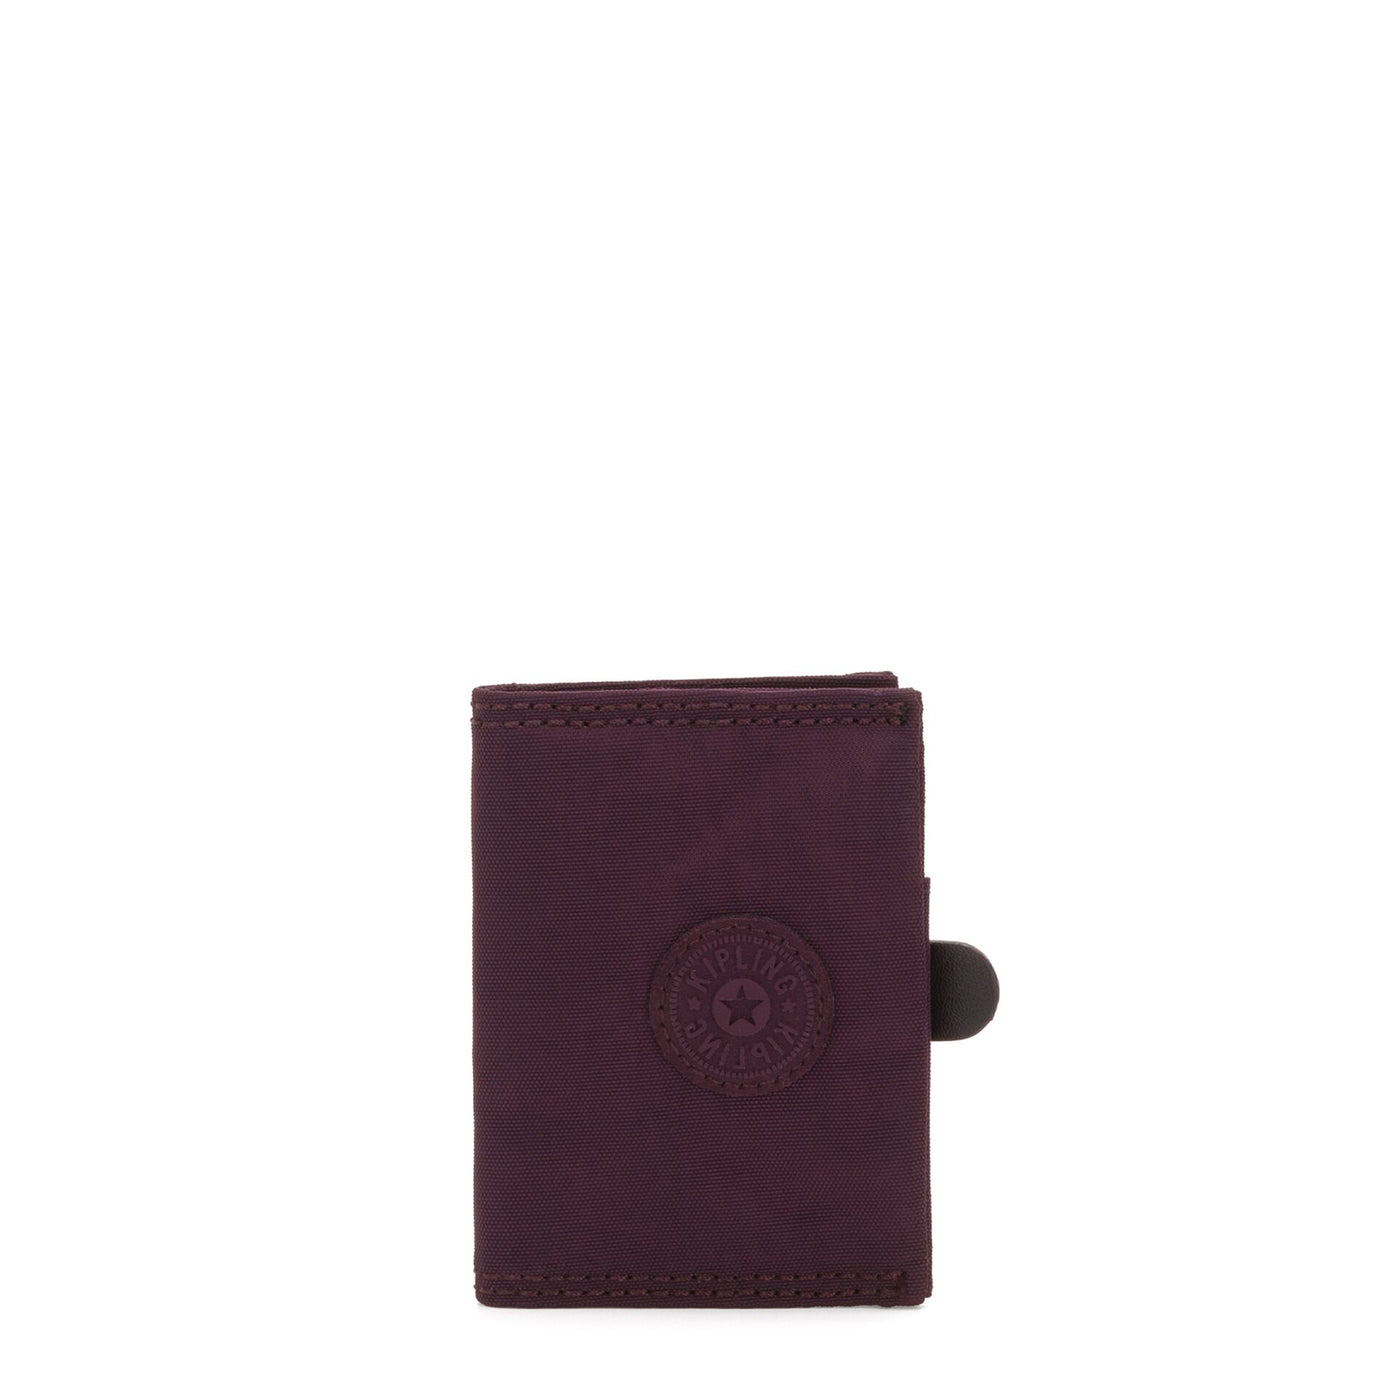 Shop The Latest Collection Of Kipling Card Keeper-I5457 In Lebanon